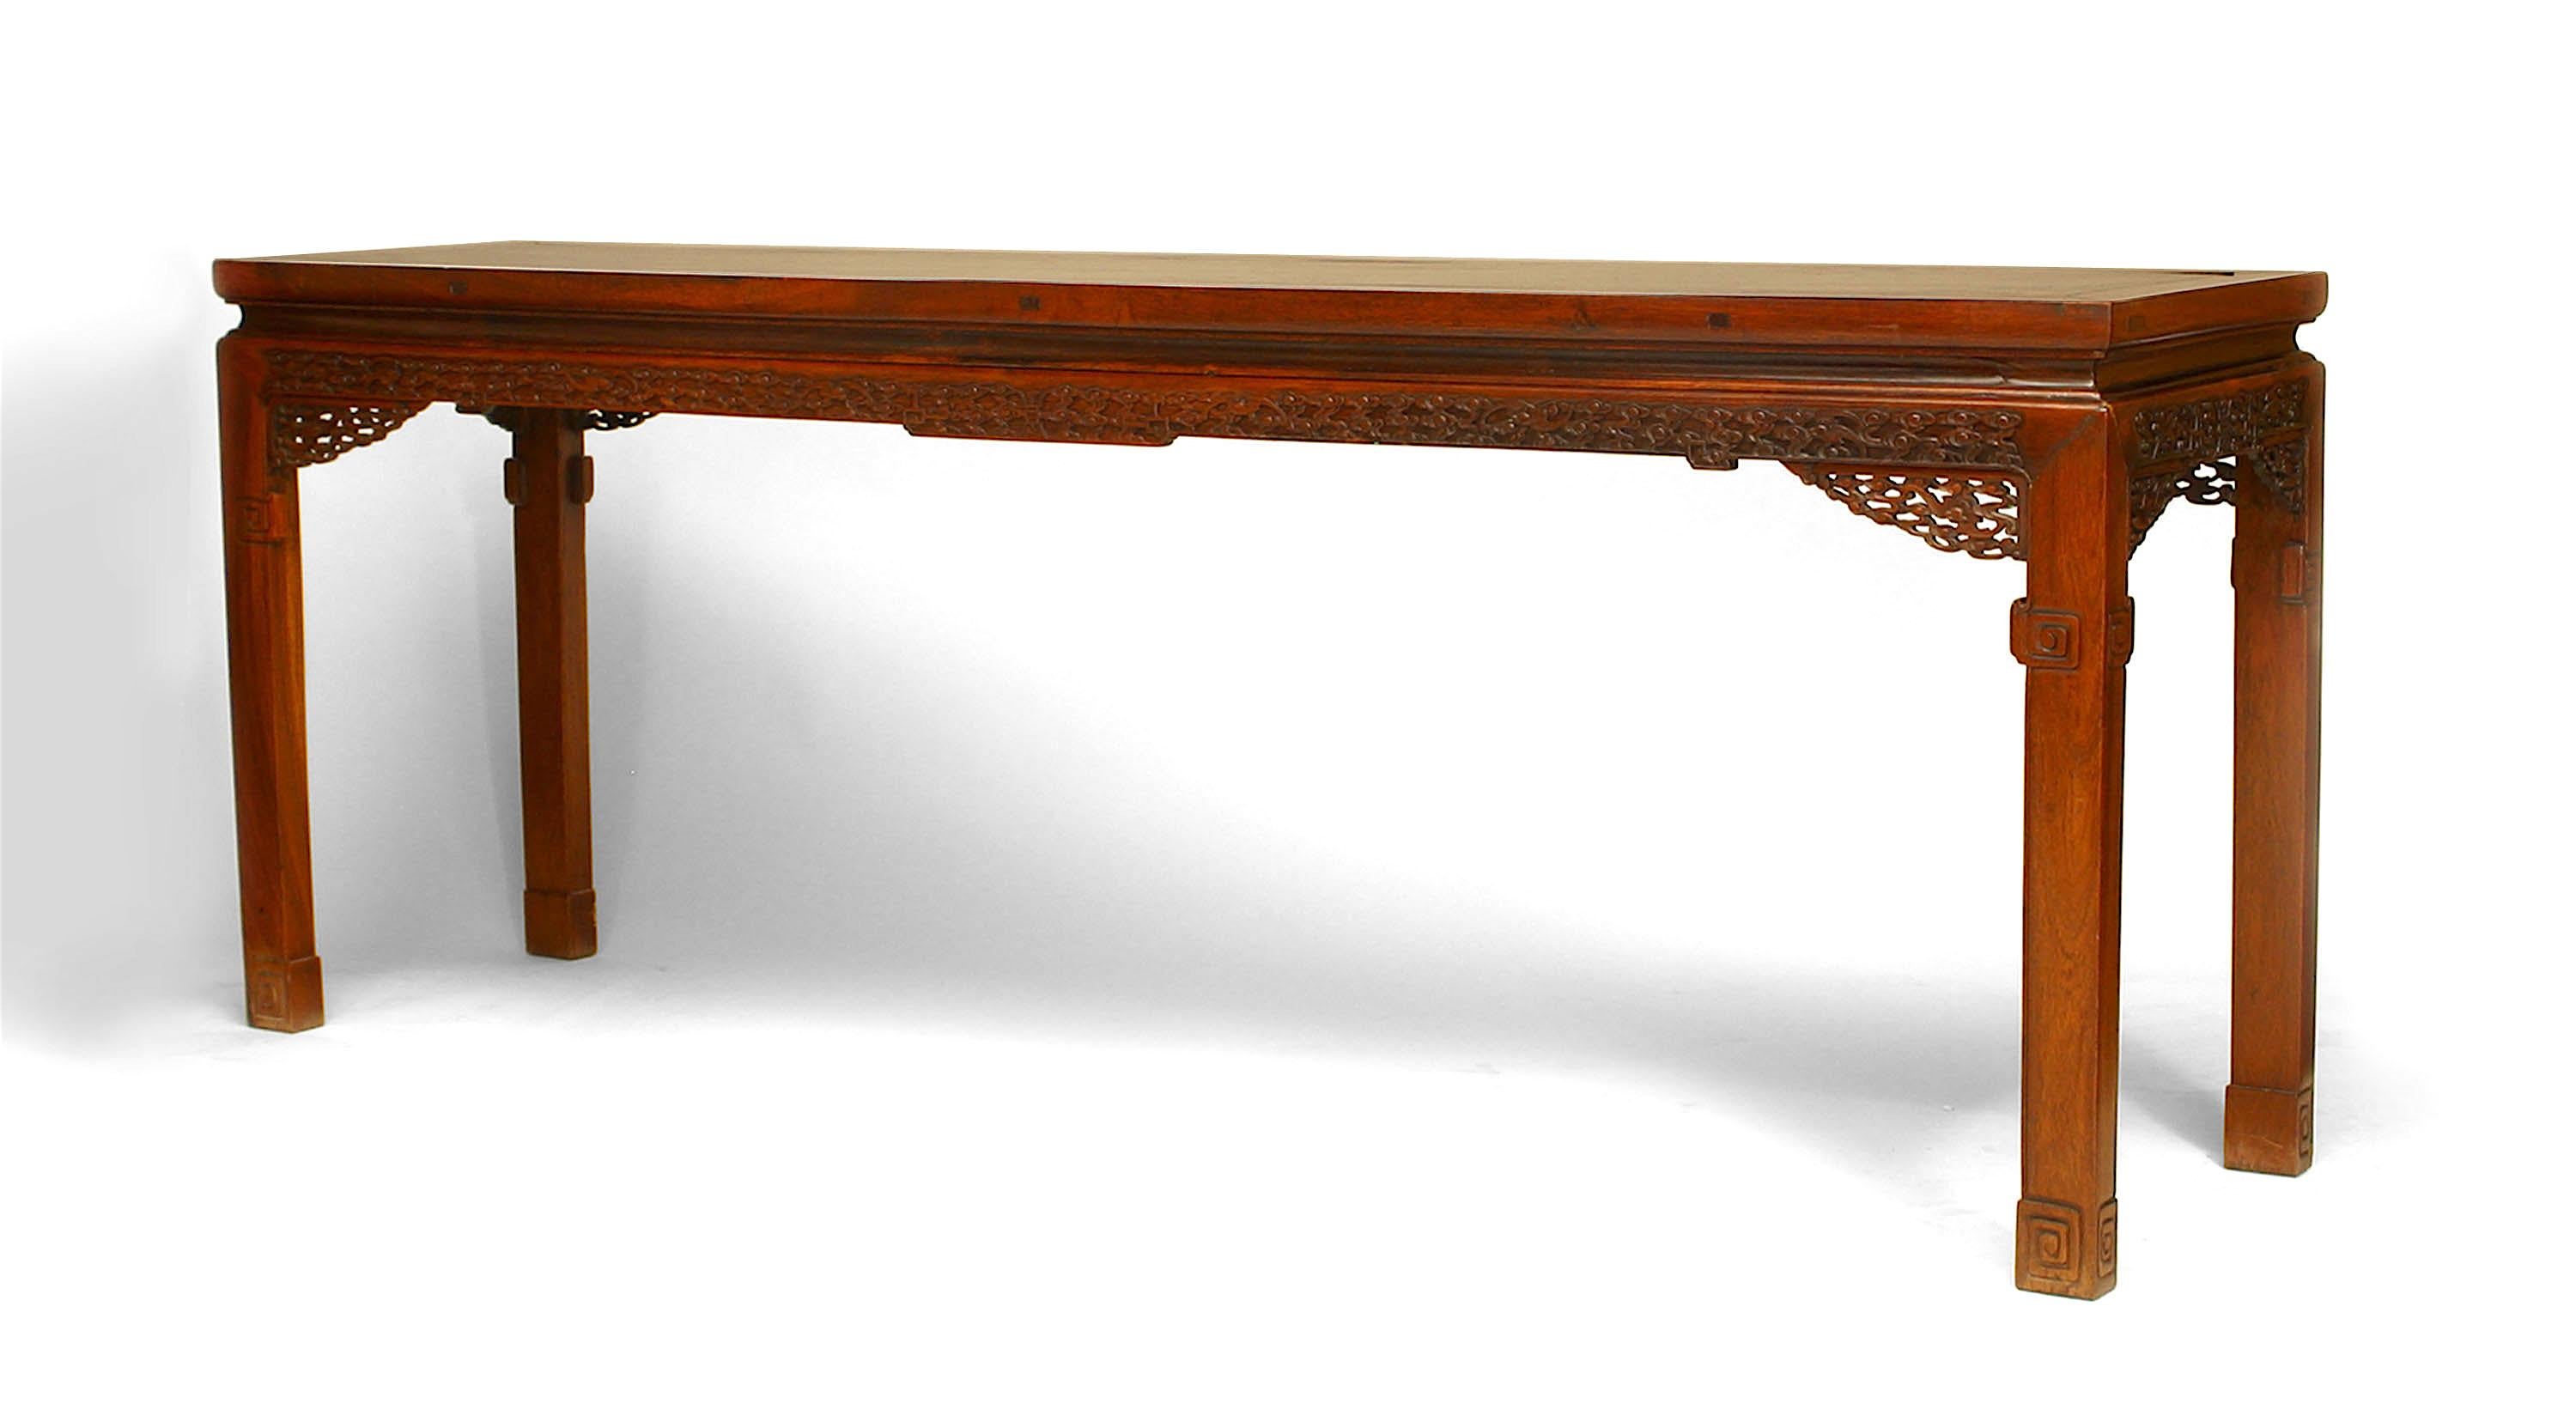 Asian Chinese (Qing Dynasty-18/19th Cent) large hardwood console scroll table with finely carved apron on all sides and filigree corners.
